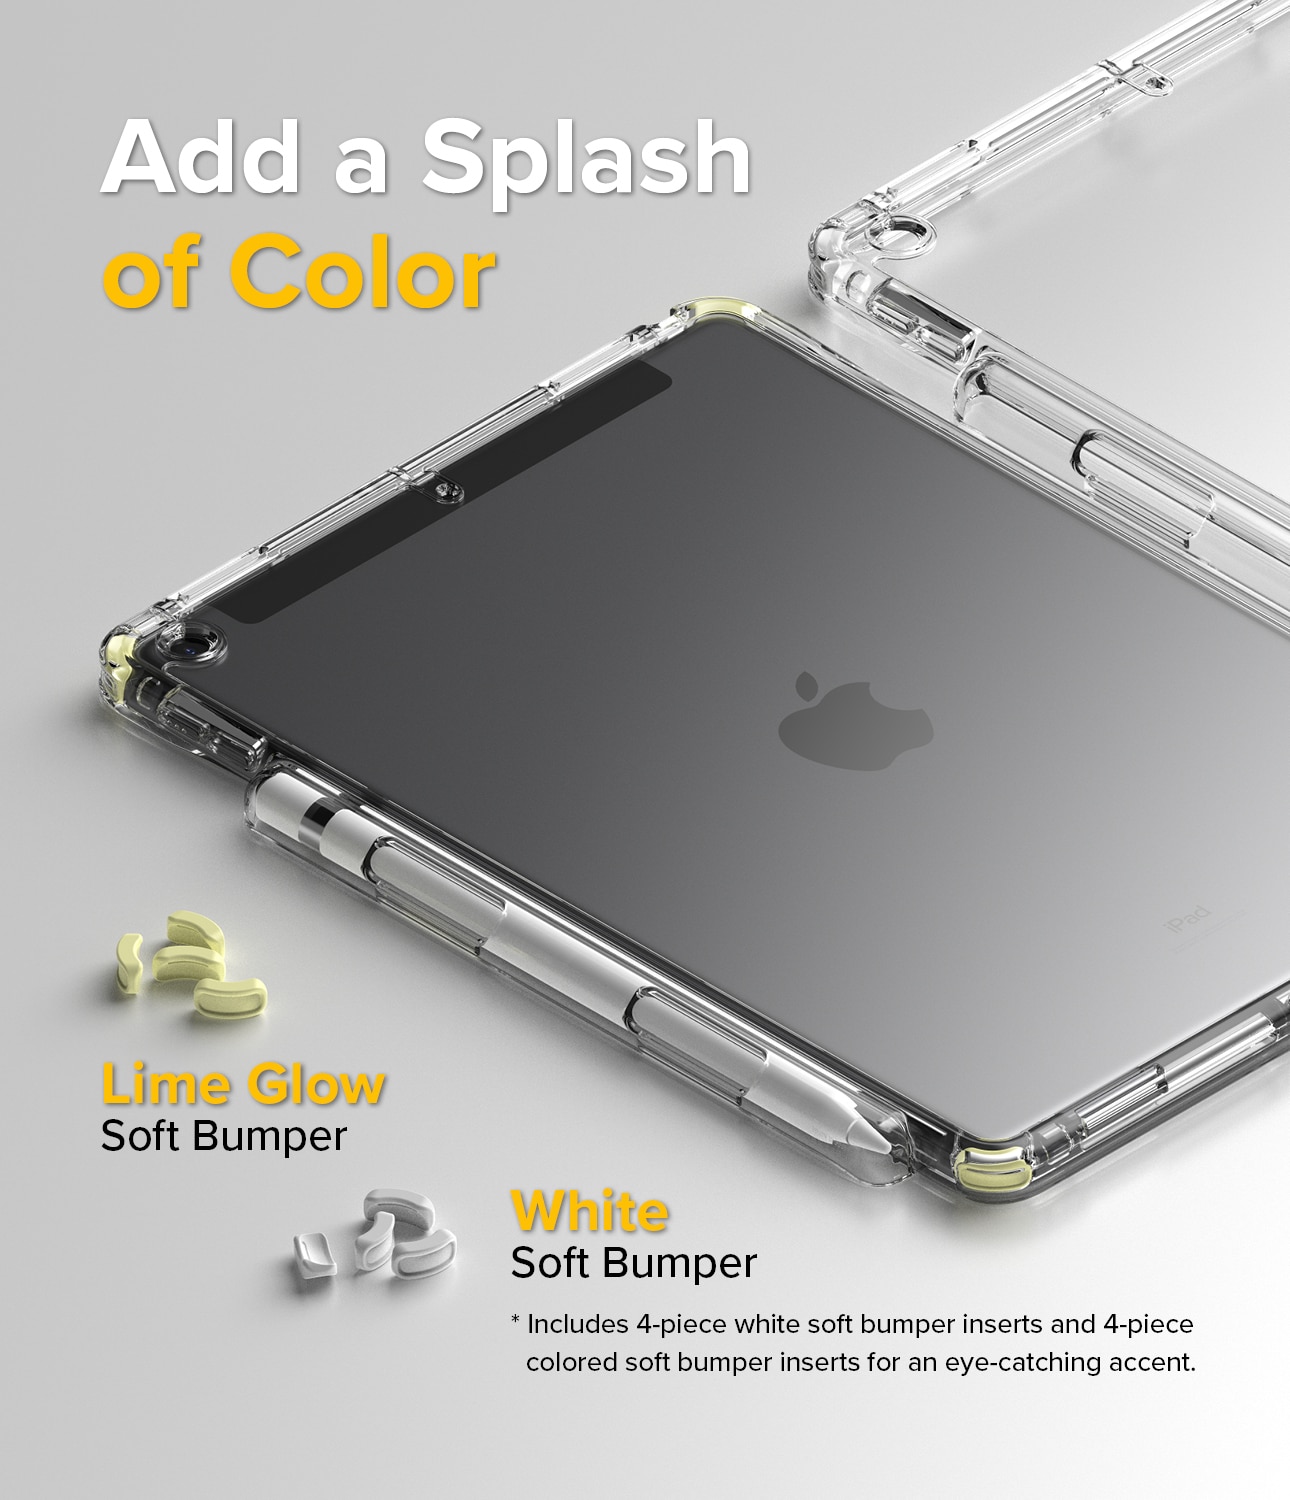 Cover Fusion Plus iPad 10.2 7th Gen (2019) White/Lime Glow